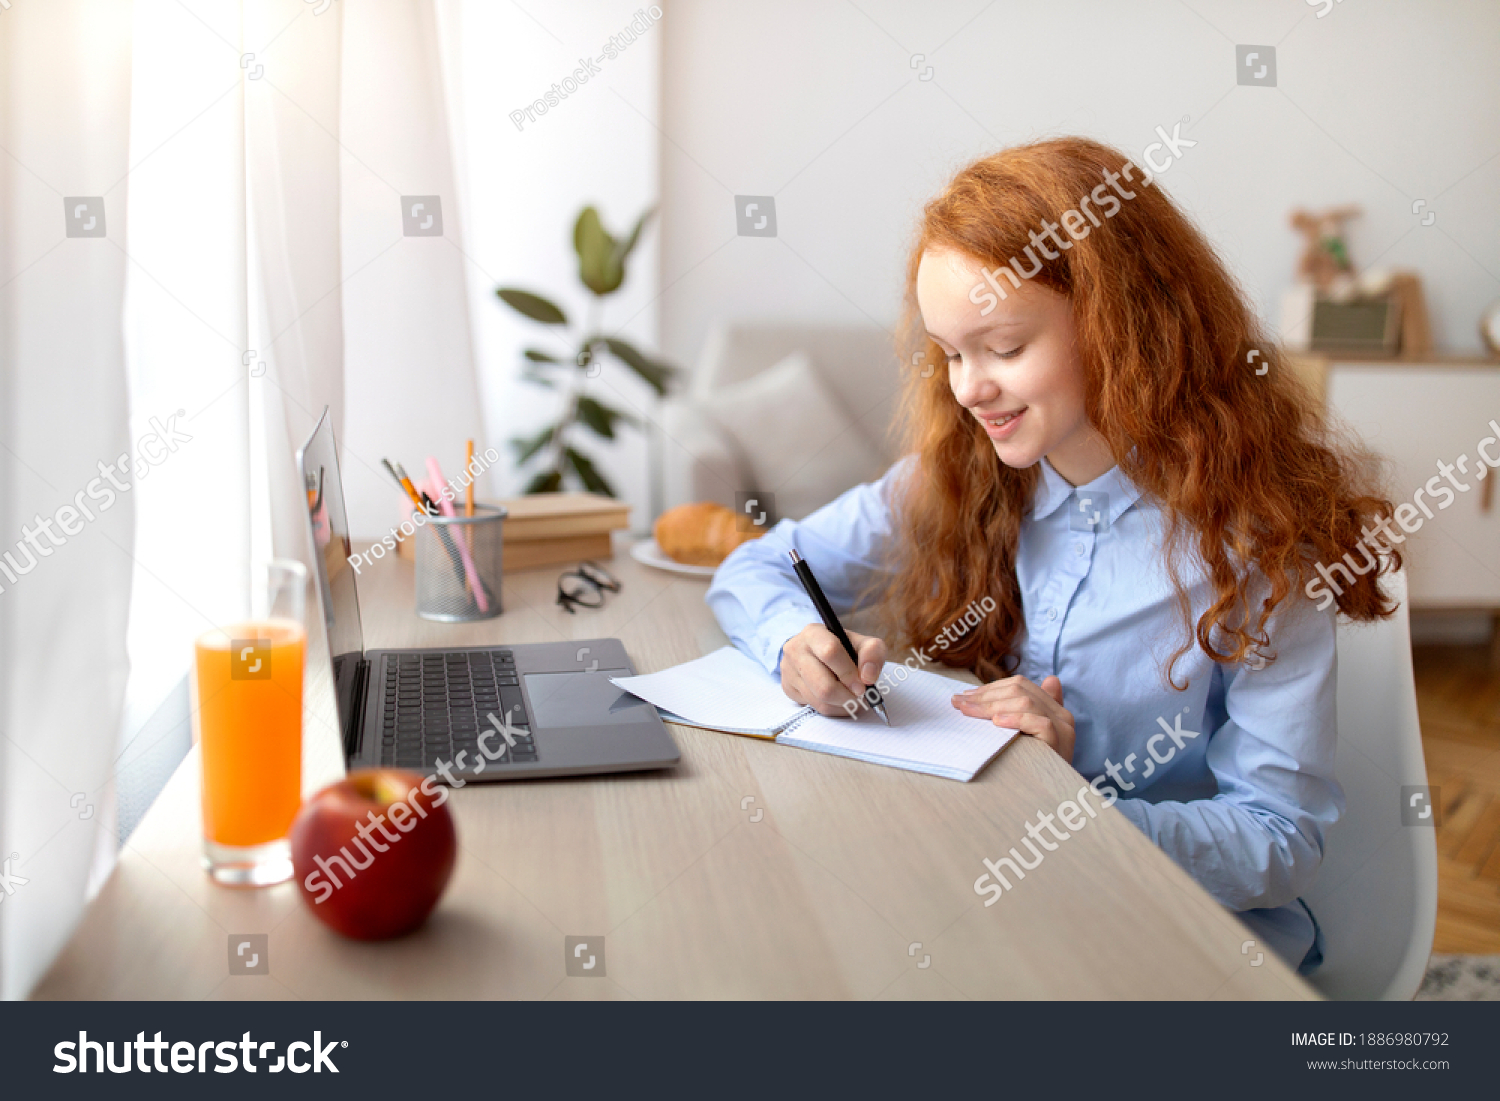 Remote Education Concept. Smiling young teenage girl sitting at table, using laptop and writing in her notebook or diary. Schoolgirl watching online course, taking notes, doing homework #1886980792